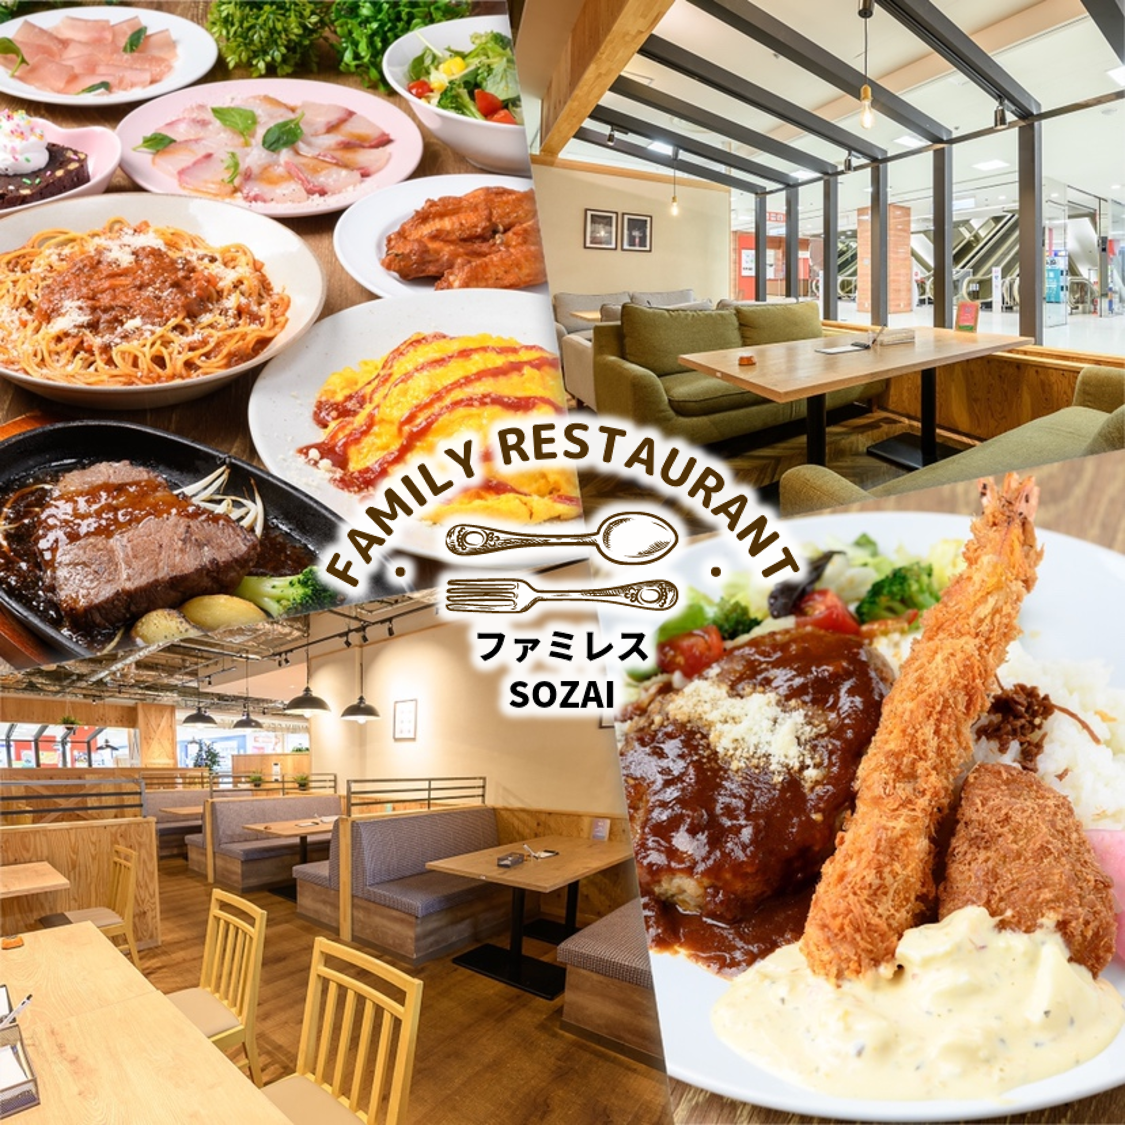 Authentic food and a relaxing space ◇ It is a family restaurant with feelings ♪